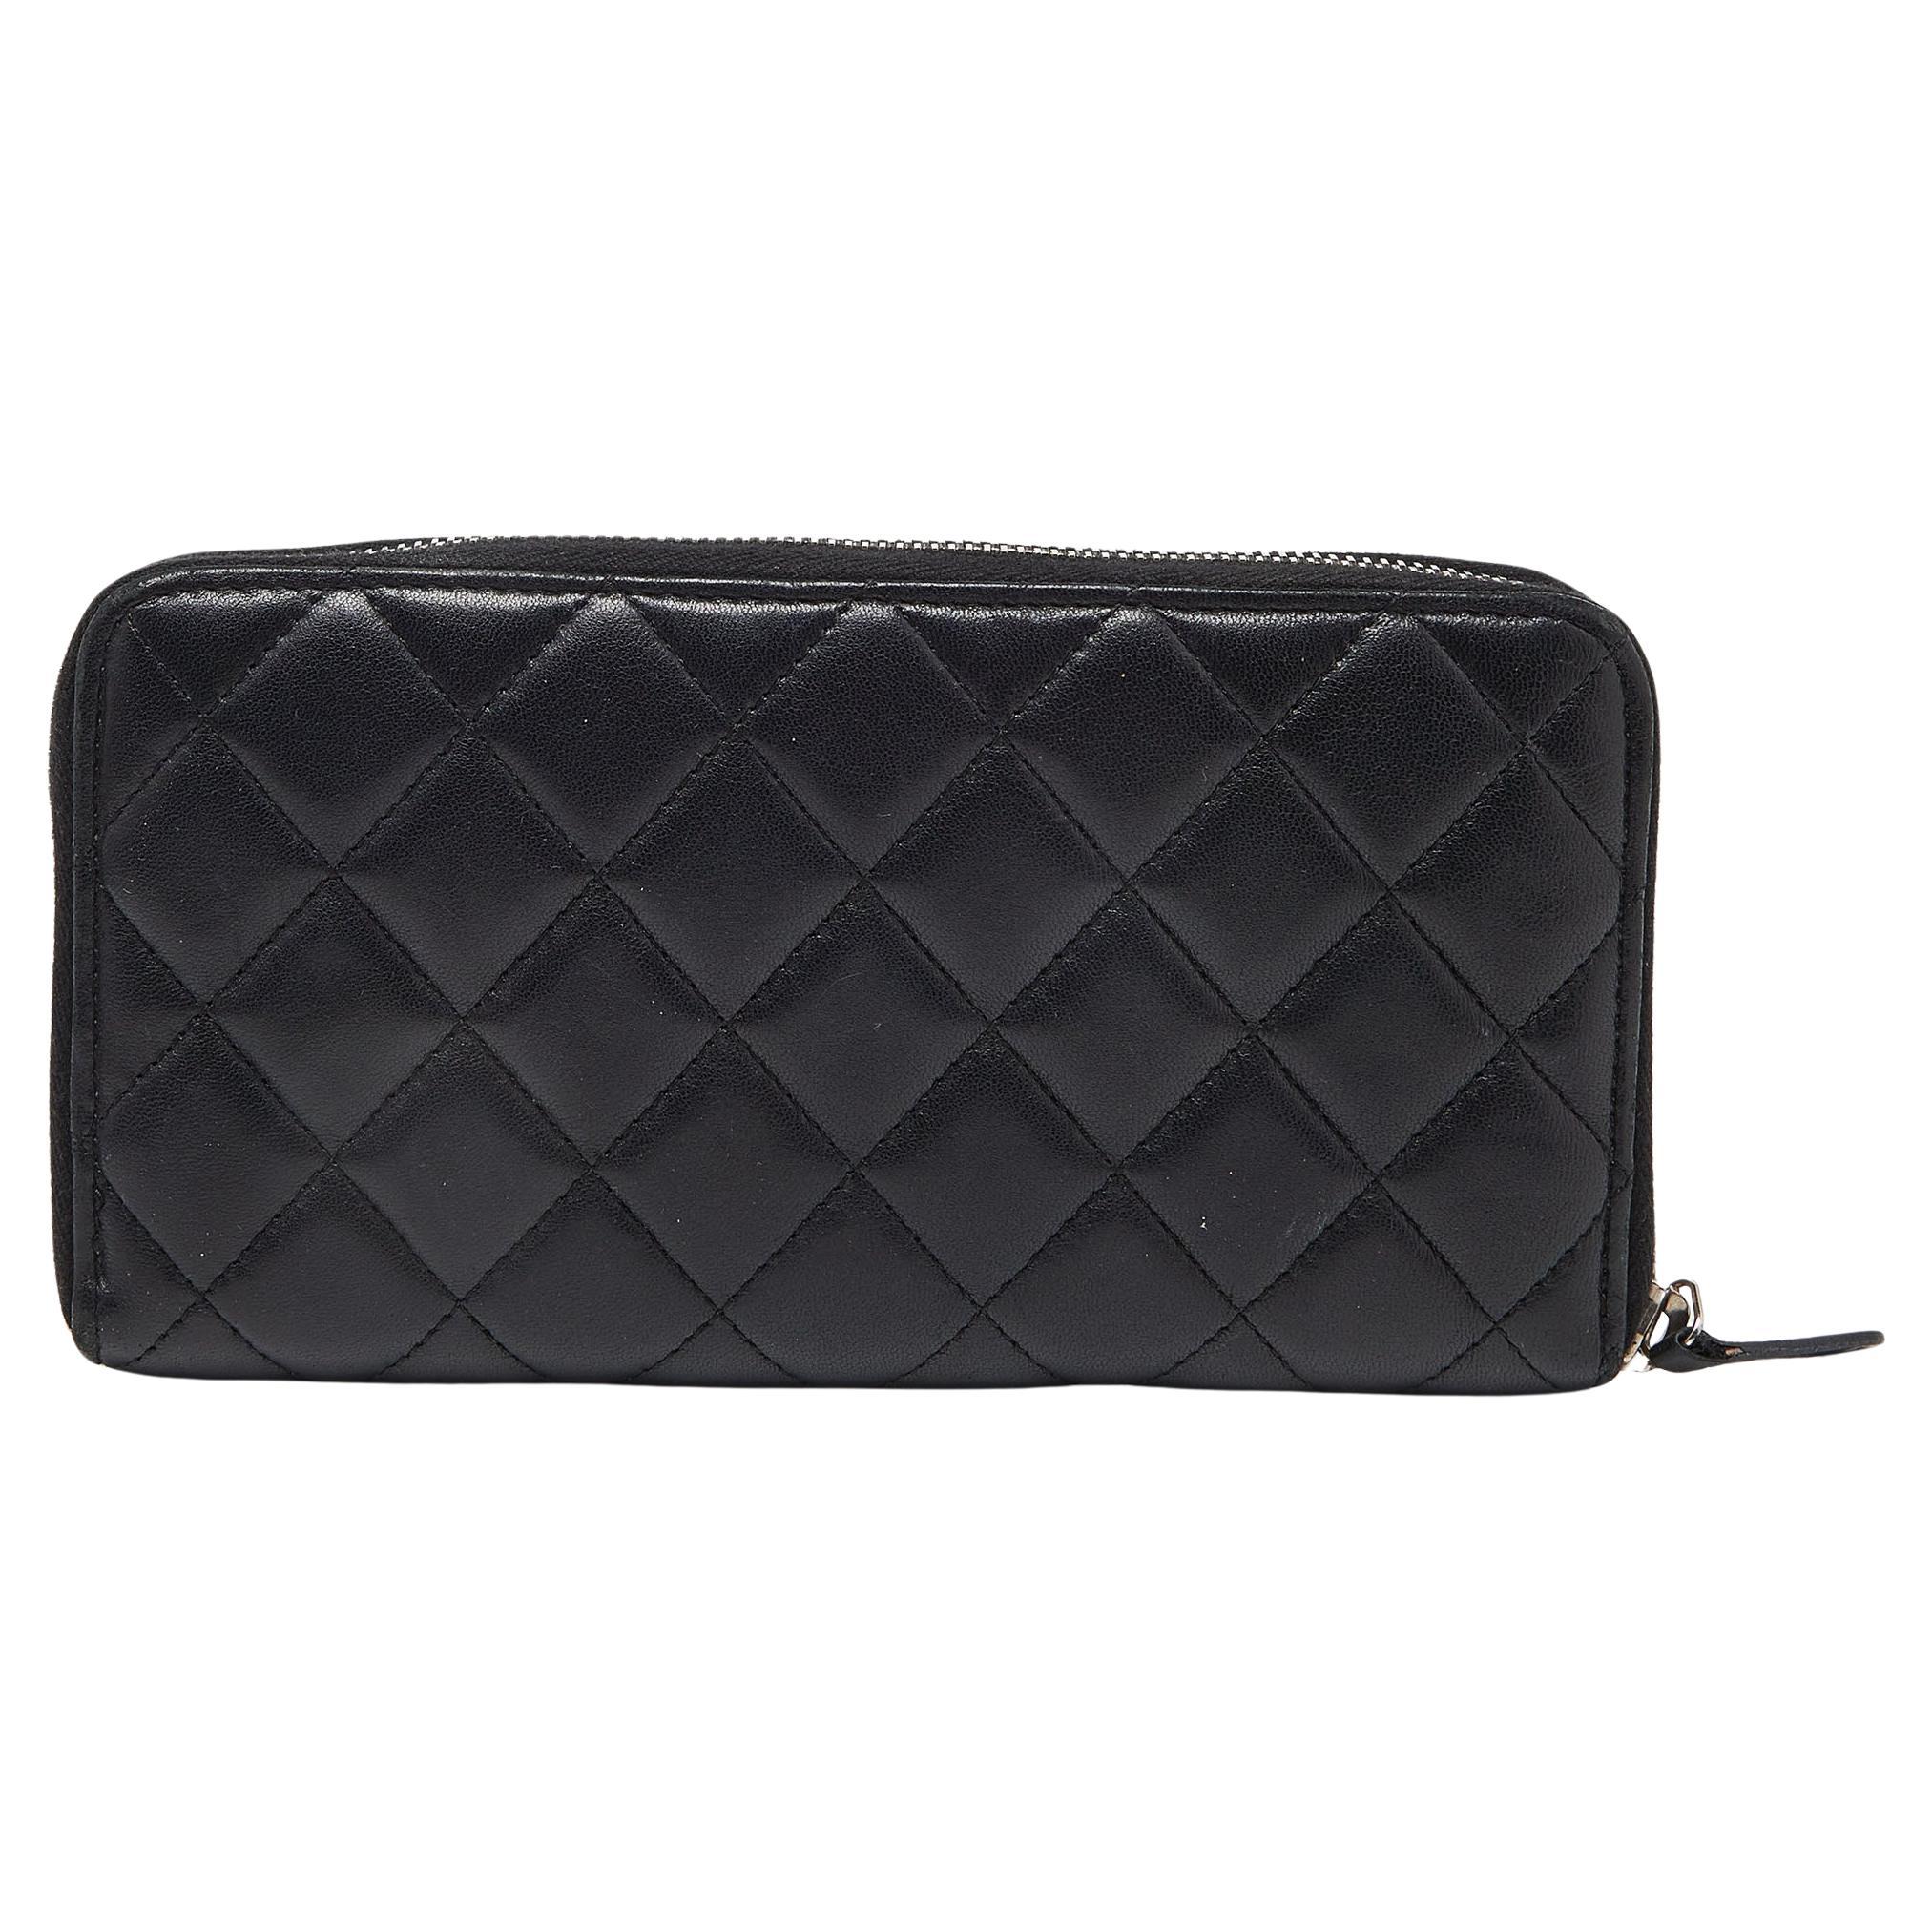 Chanel Black Quilted Leather CC Zip Around Wallet For Sale